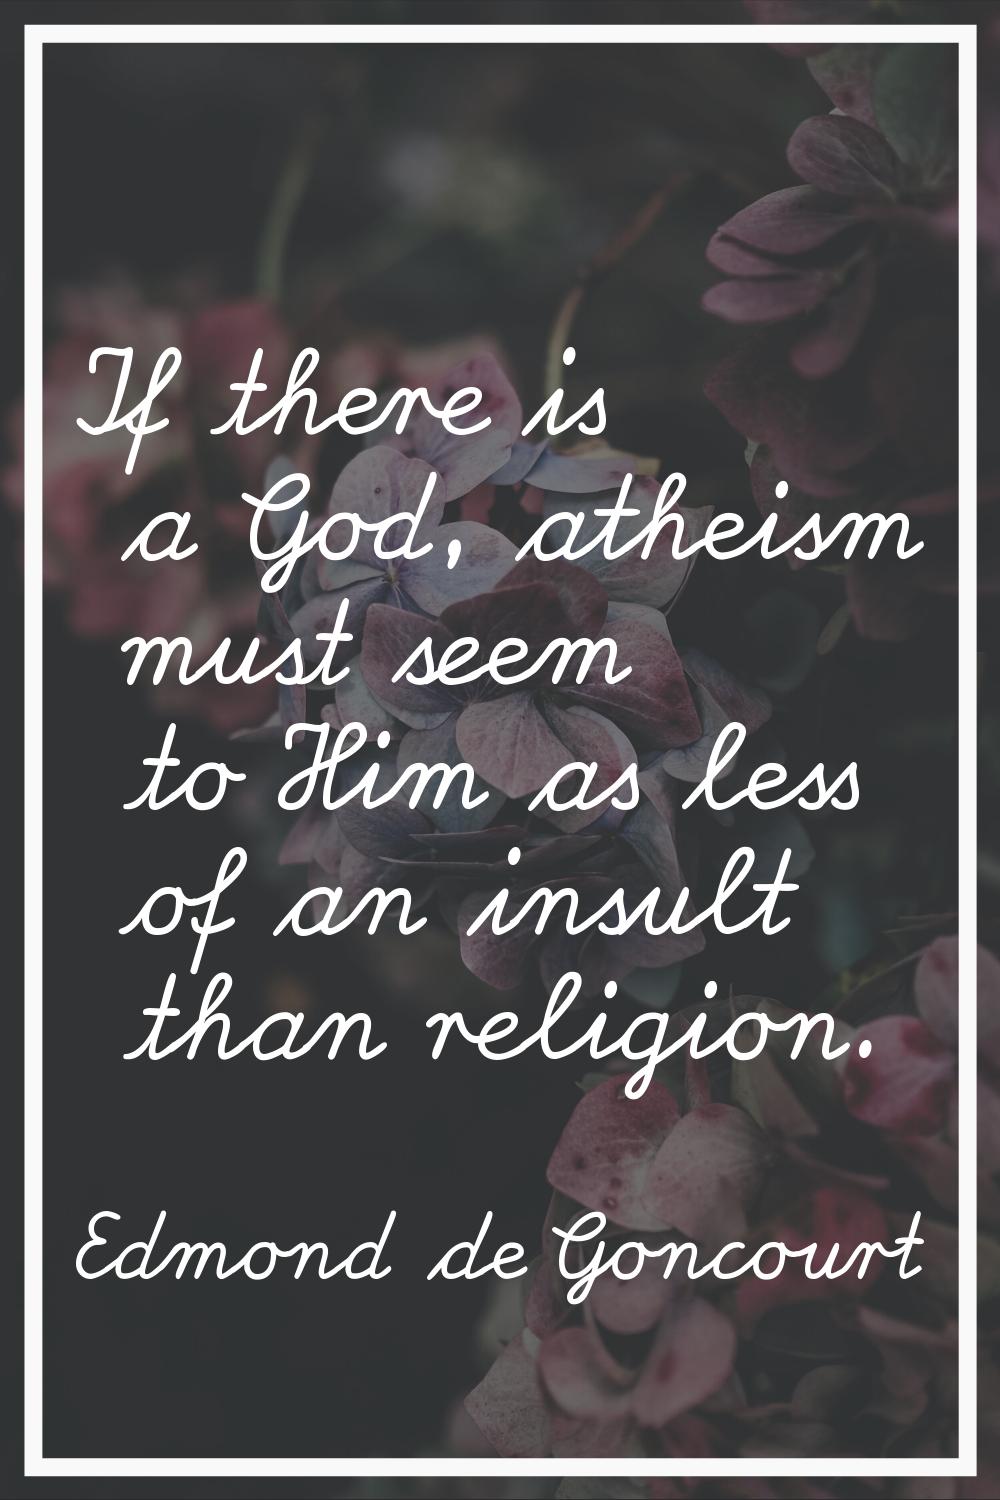 If there is a God, atheism must seem to Him as less of an insult than religion.